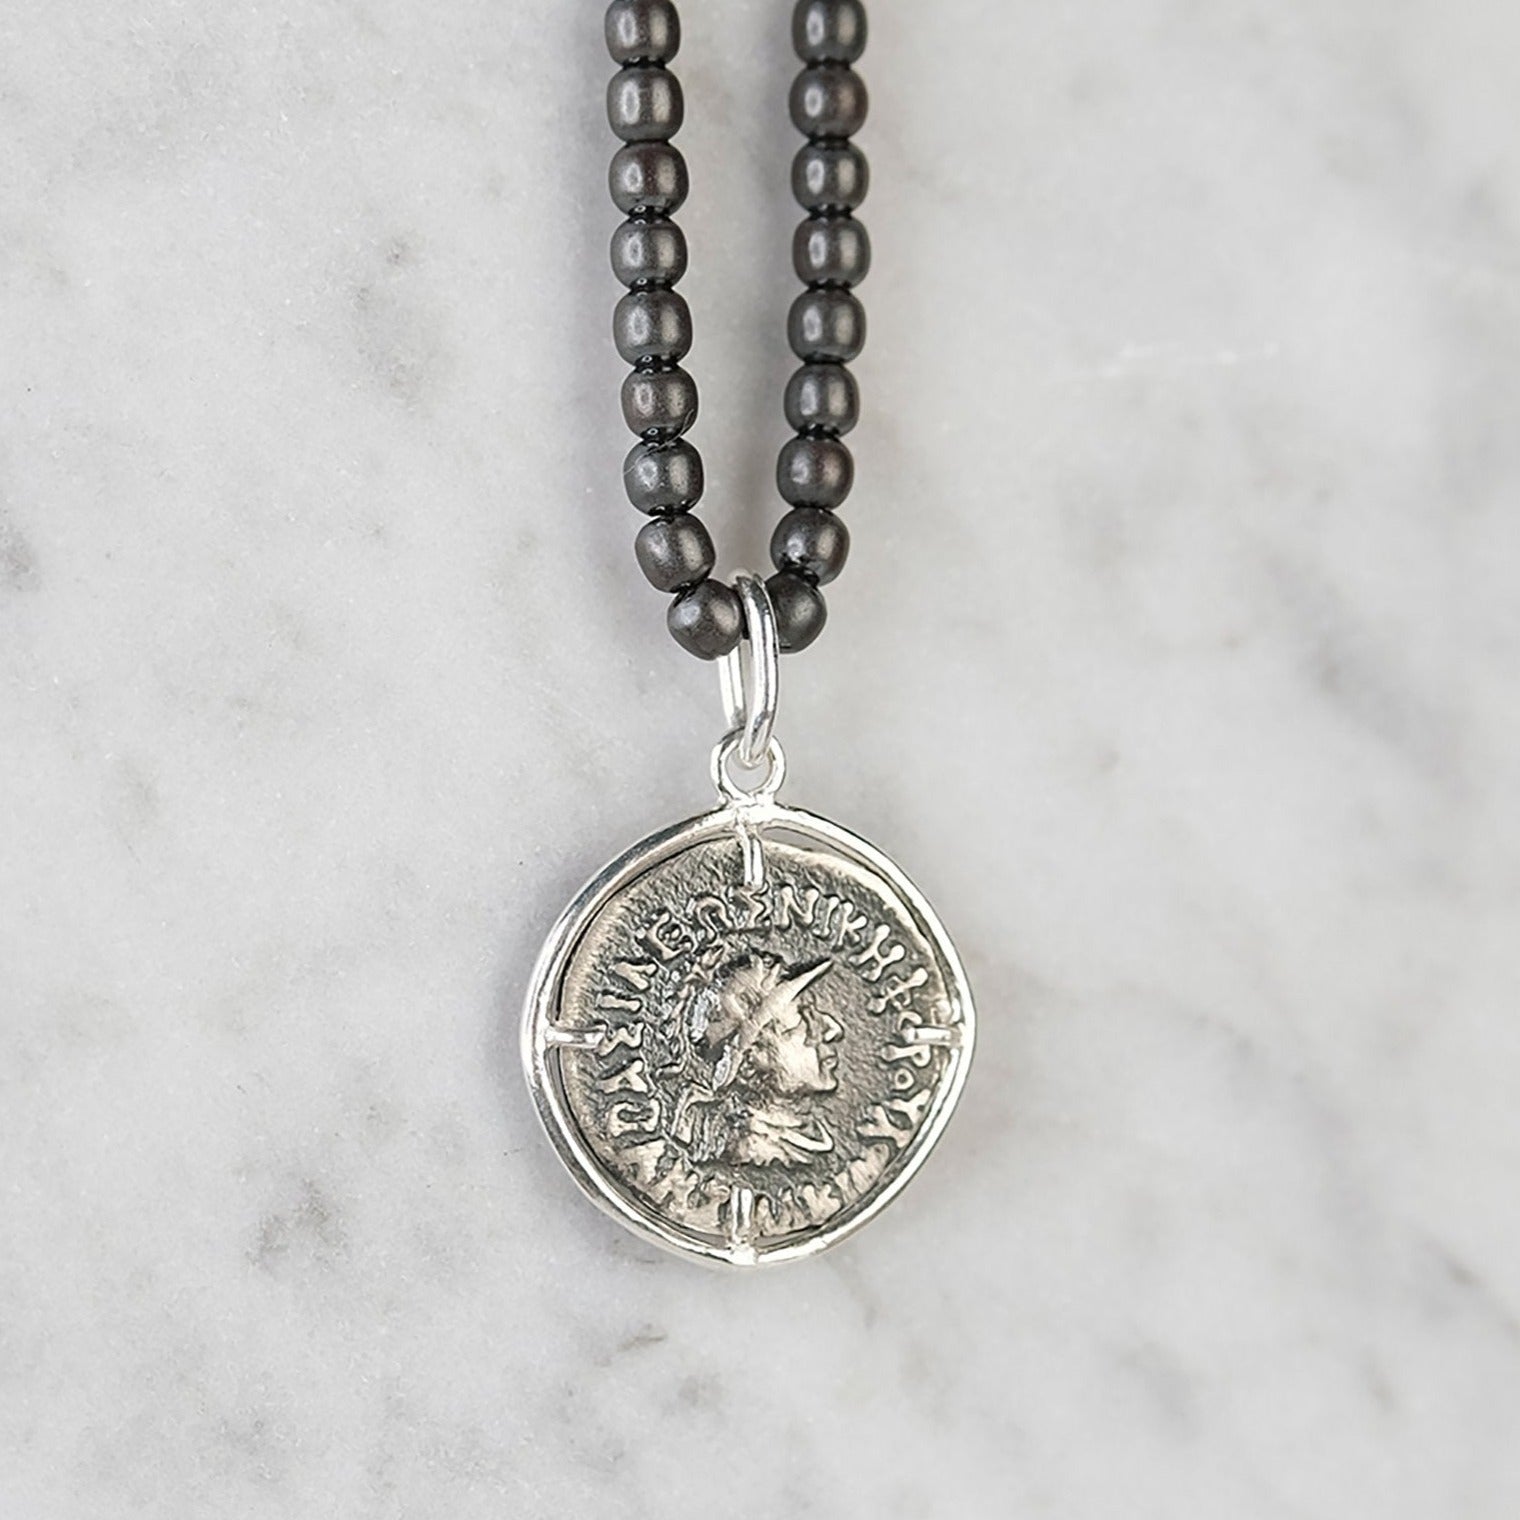 The Madstone Roman coin necklace